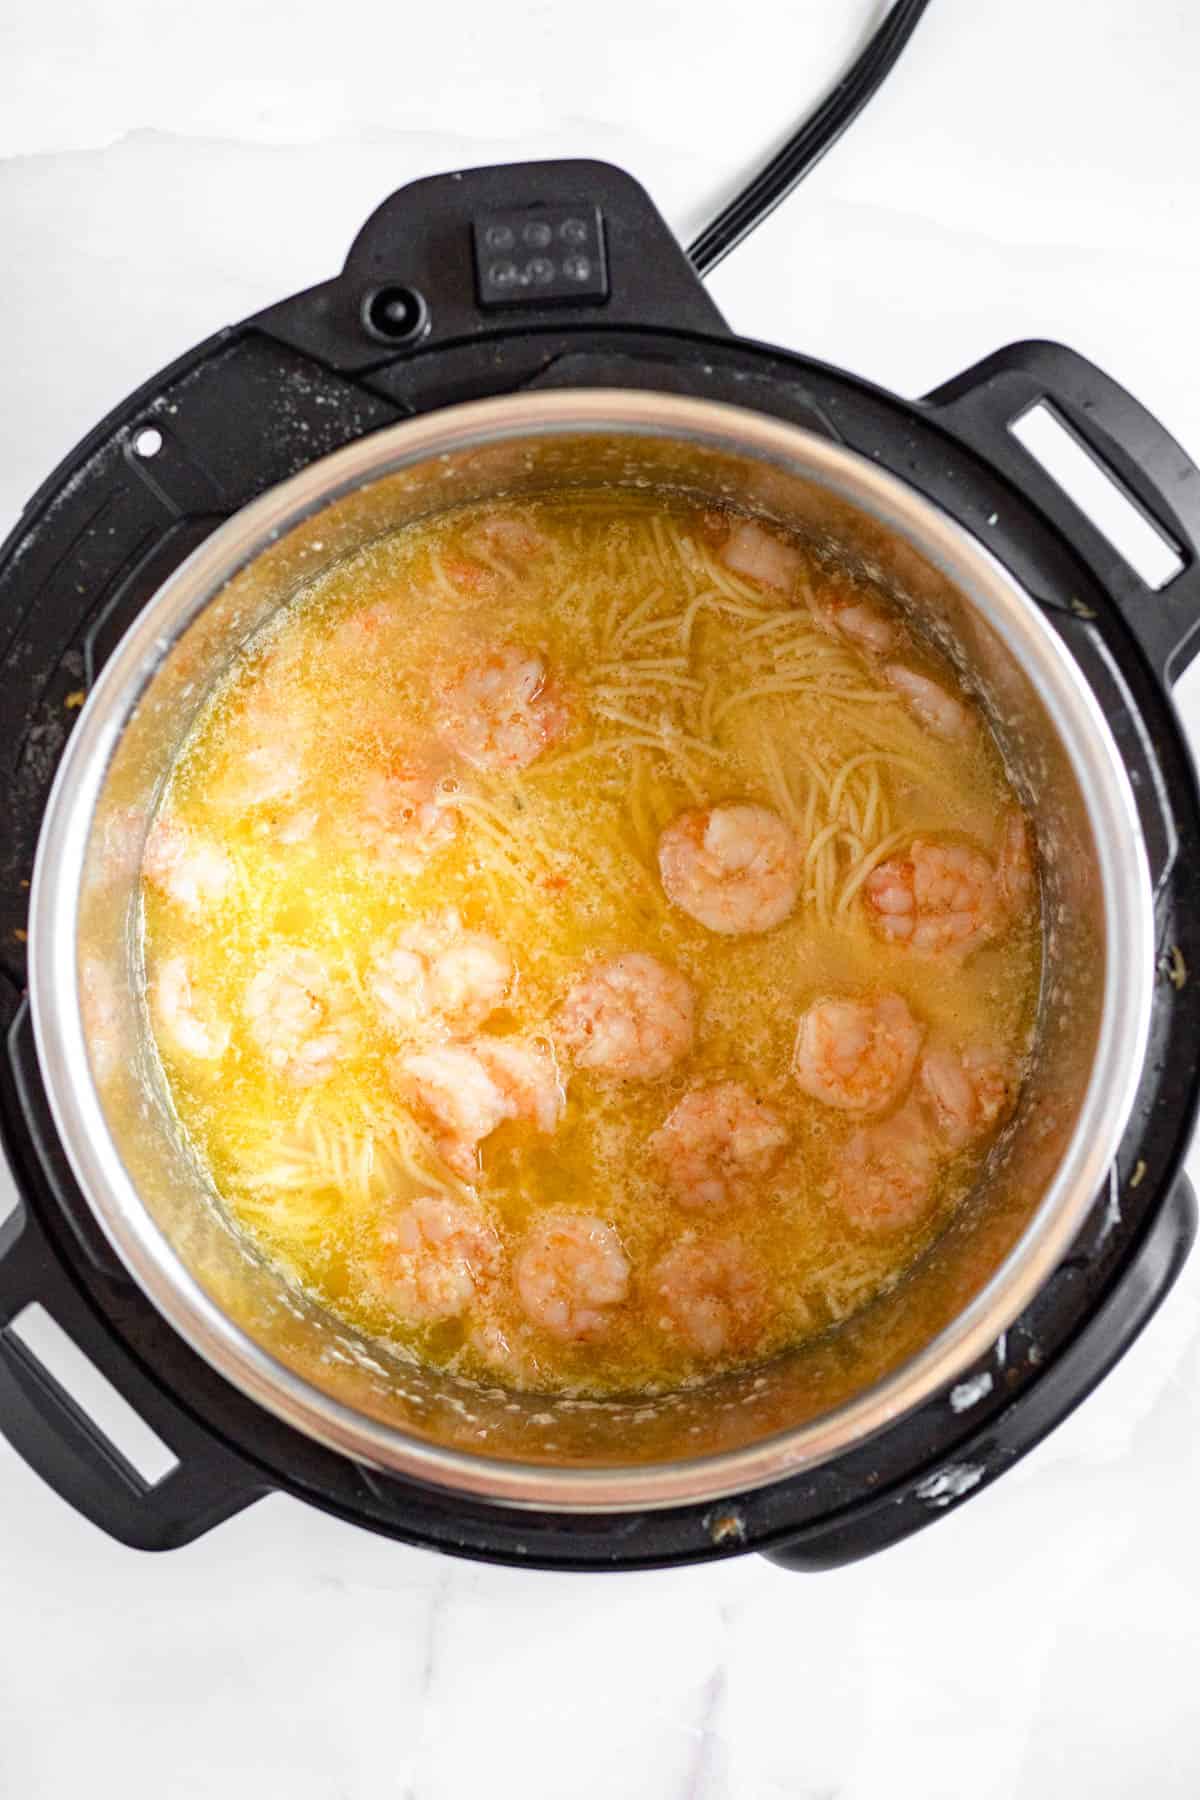 Cooked shrimp scampi in an instant pot.